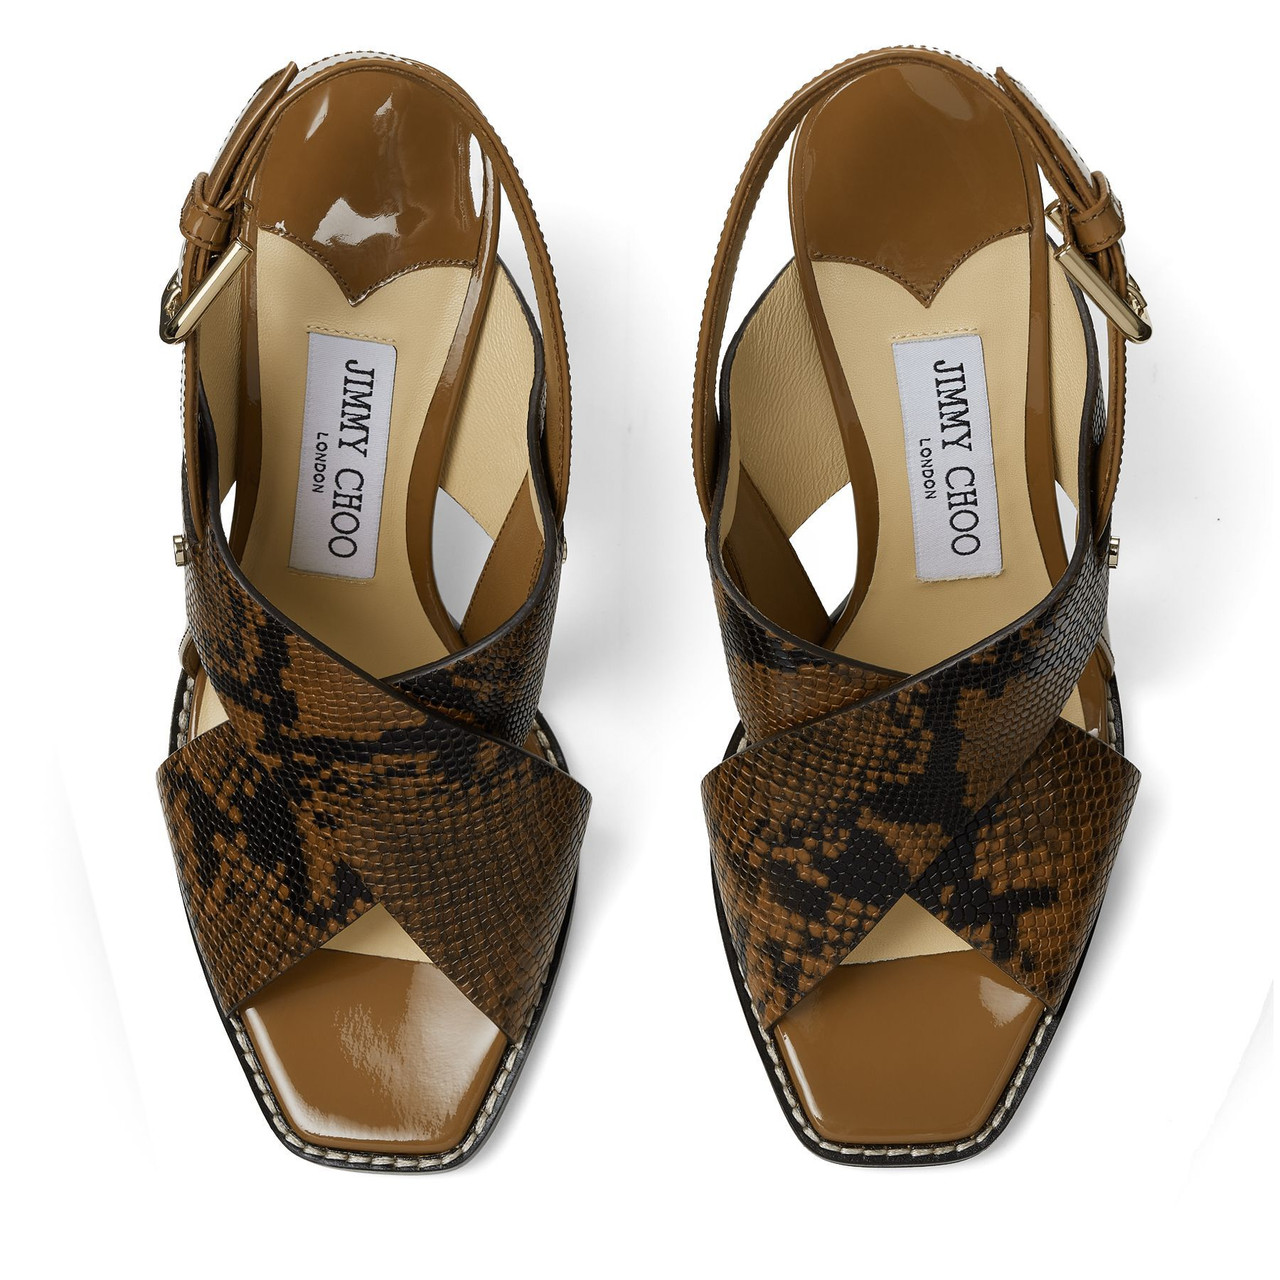 Jimmy Choo Aix 85 Snake Printed Leather Sandal in Cuoio